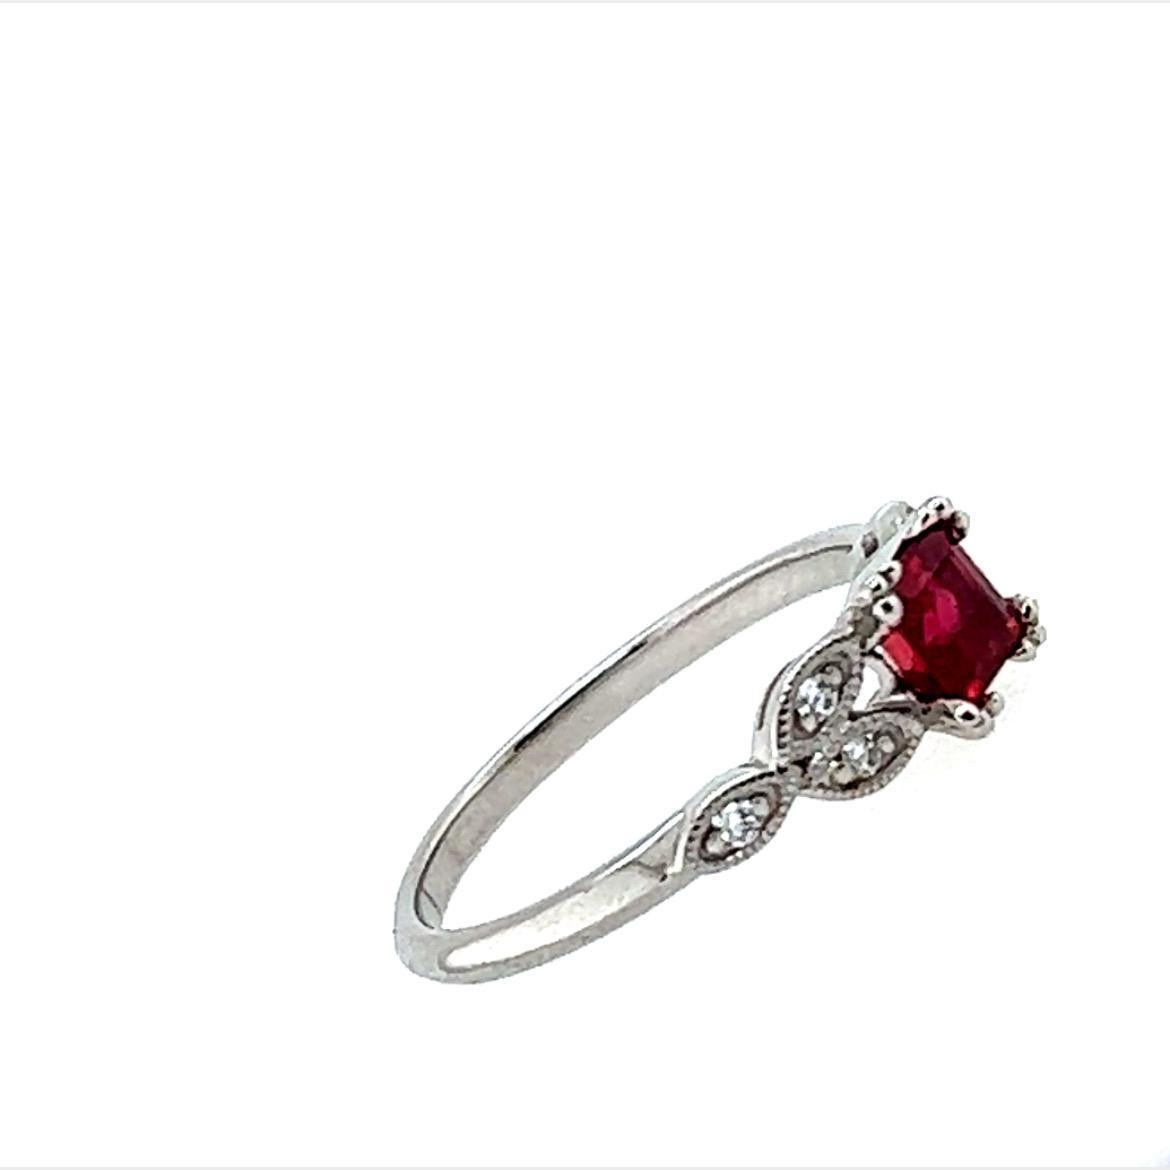 Made of a stunning princess cut blood red Ruby weighing 0.70ct, the centre stone of this beautiful masterpiece is elevated by scintillating Diamonds weighing 0.06cts set in 18K White Gold. The elegant design of this dainty ring in which the diamonds